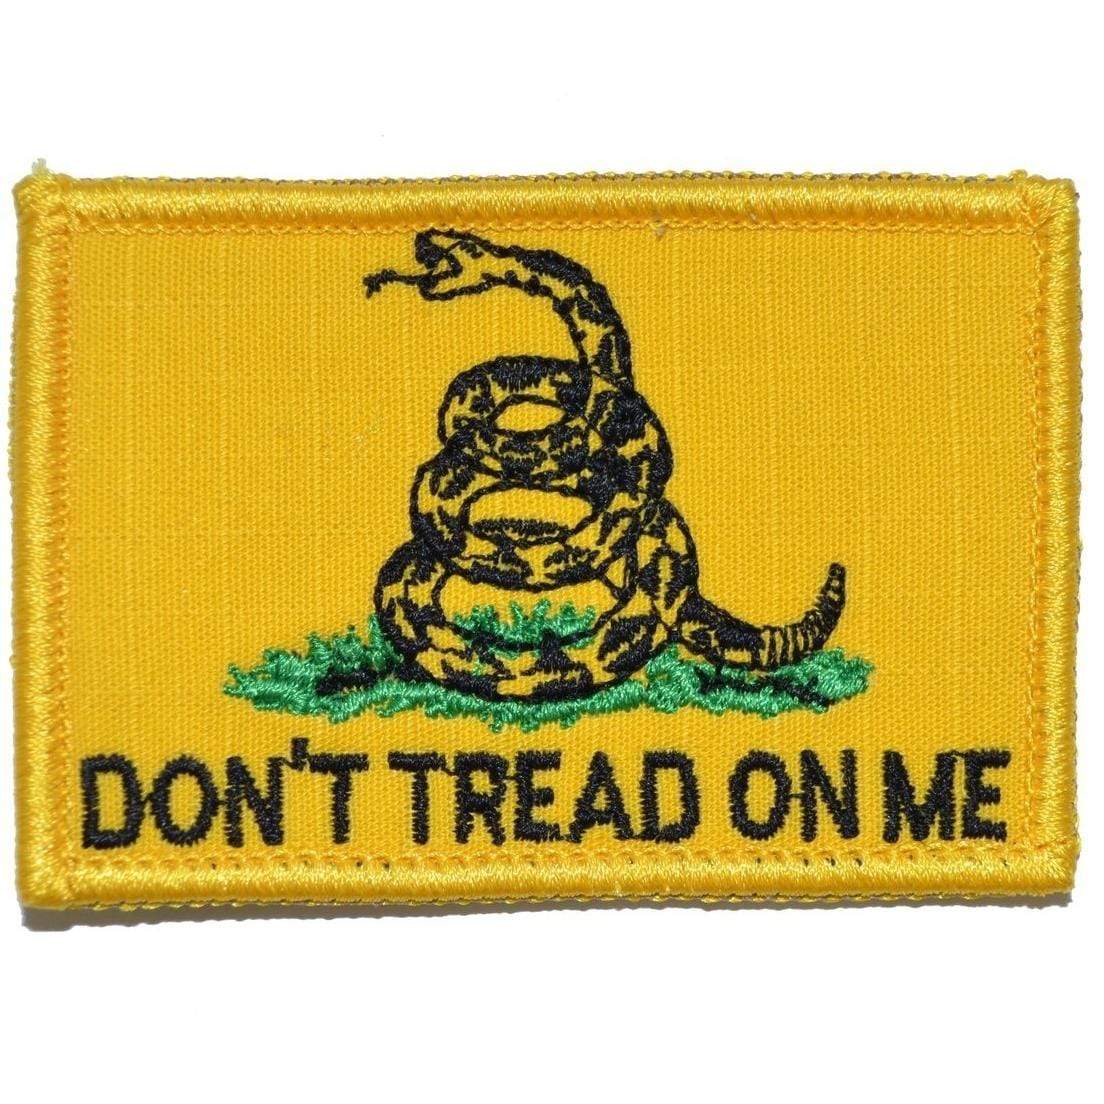 Don't Tread on Me Gadsden Snake - 2x3 Patch, Full Color